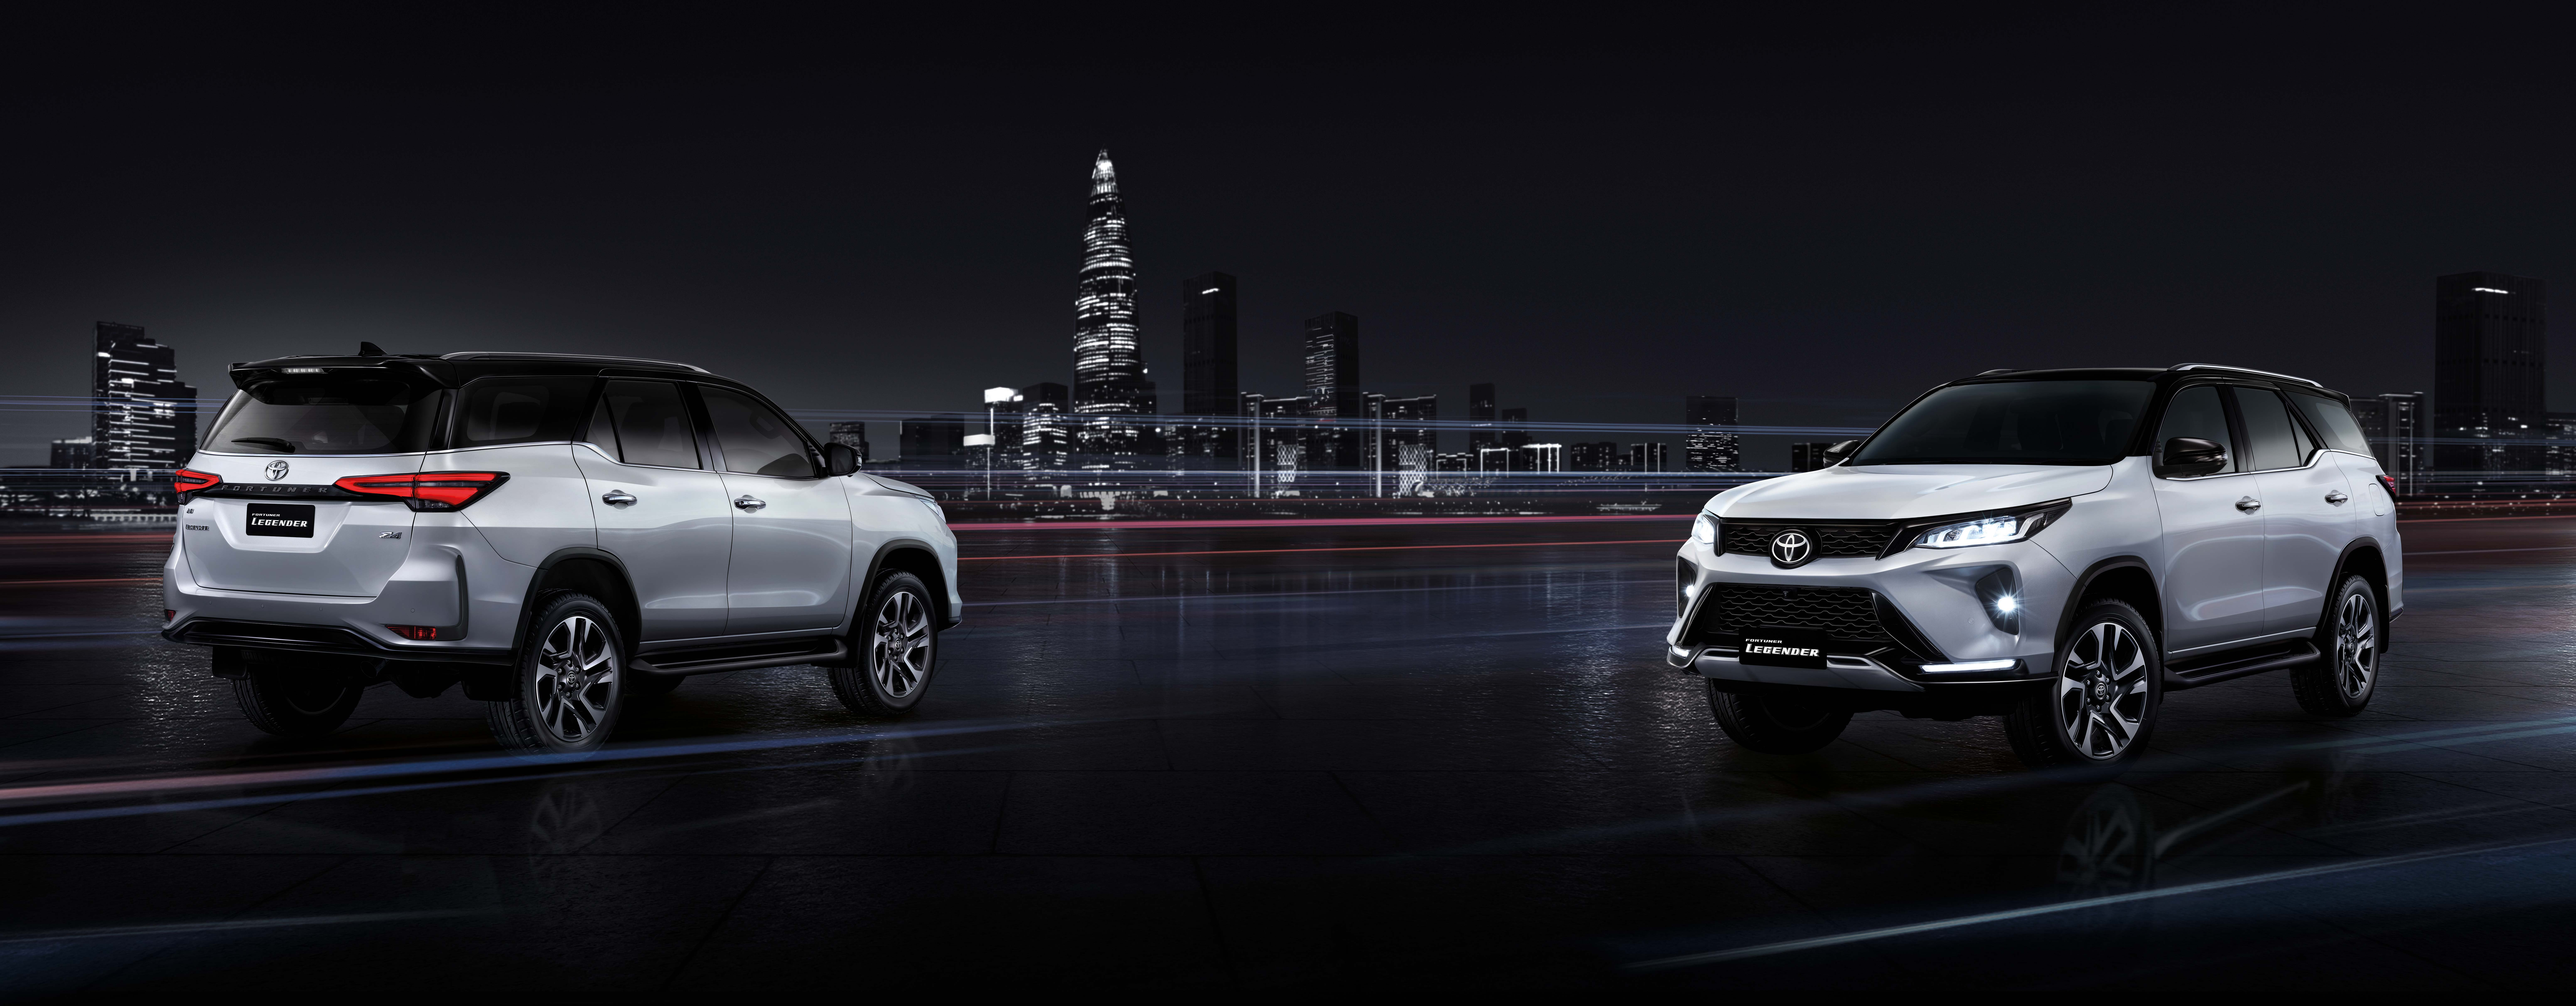 2020 Toyota Fortuner facelift revealed – 2.8L with 204 PS, 500 Nm, Thailand gets Legender with sporty face Image #1160441